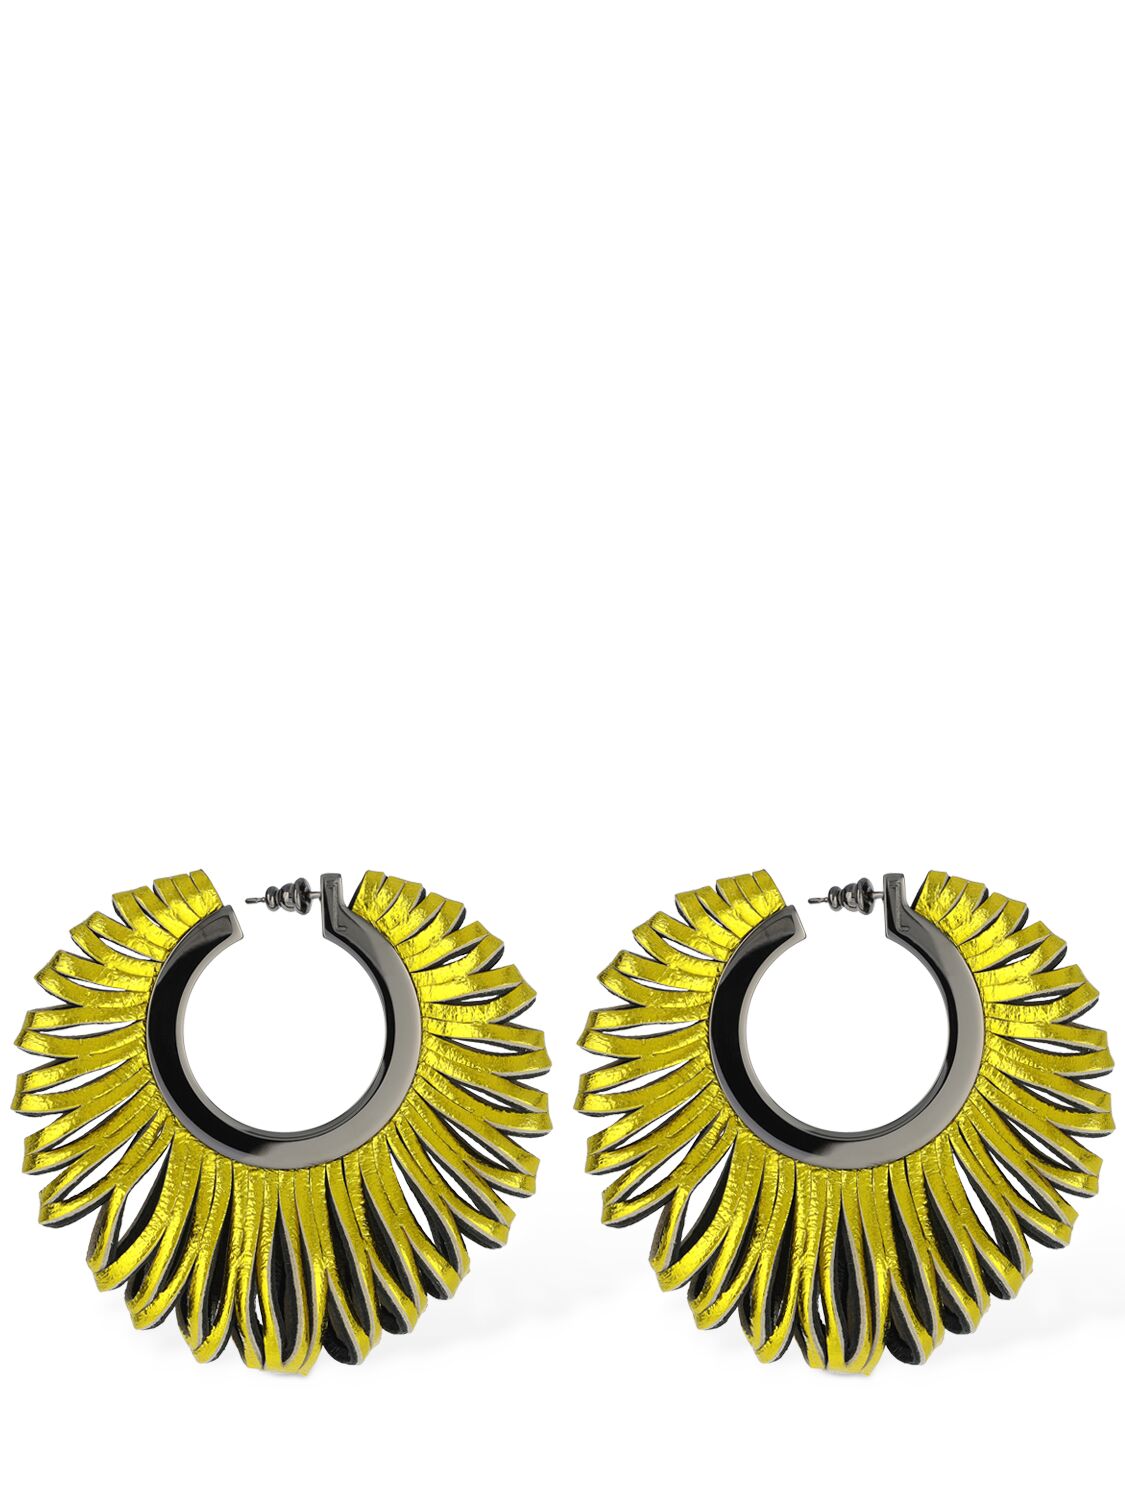 Image of Revolve Leather Earrings